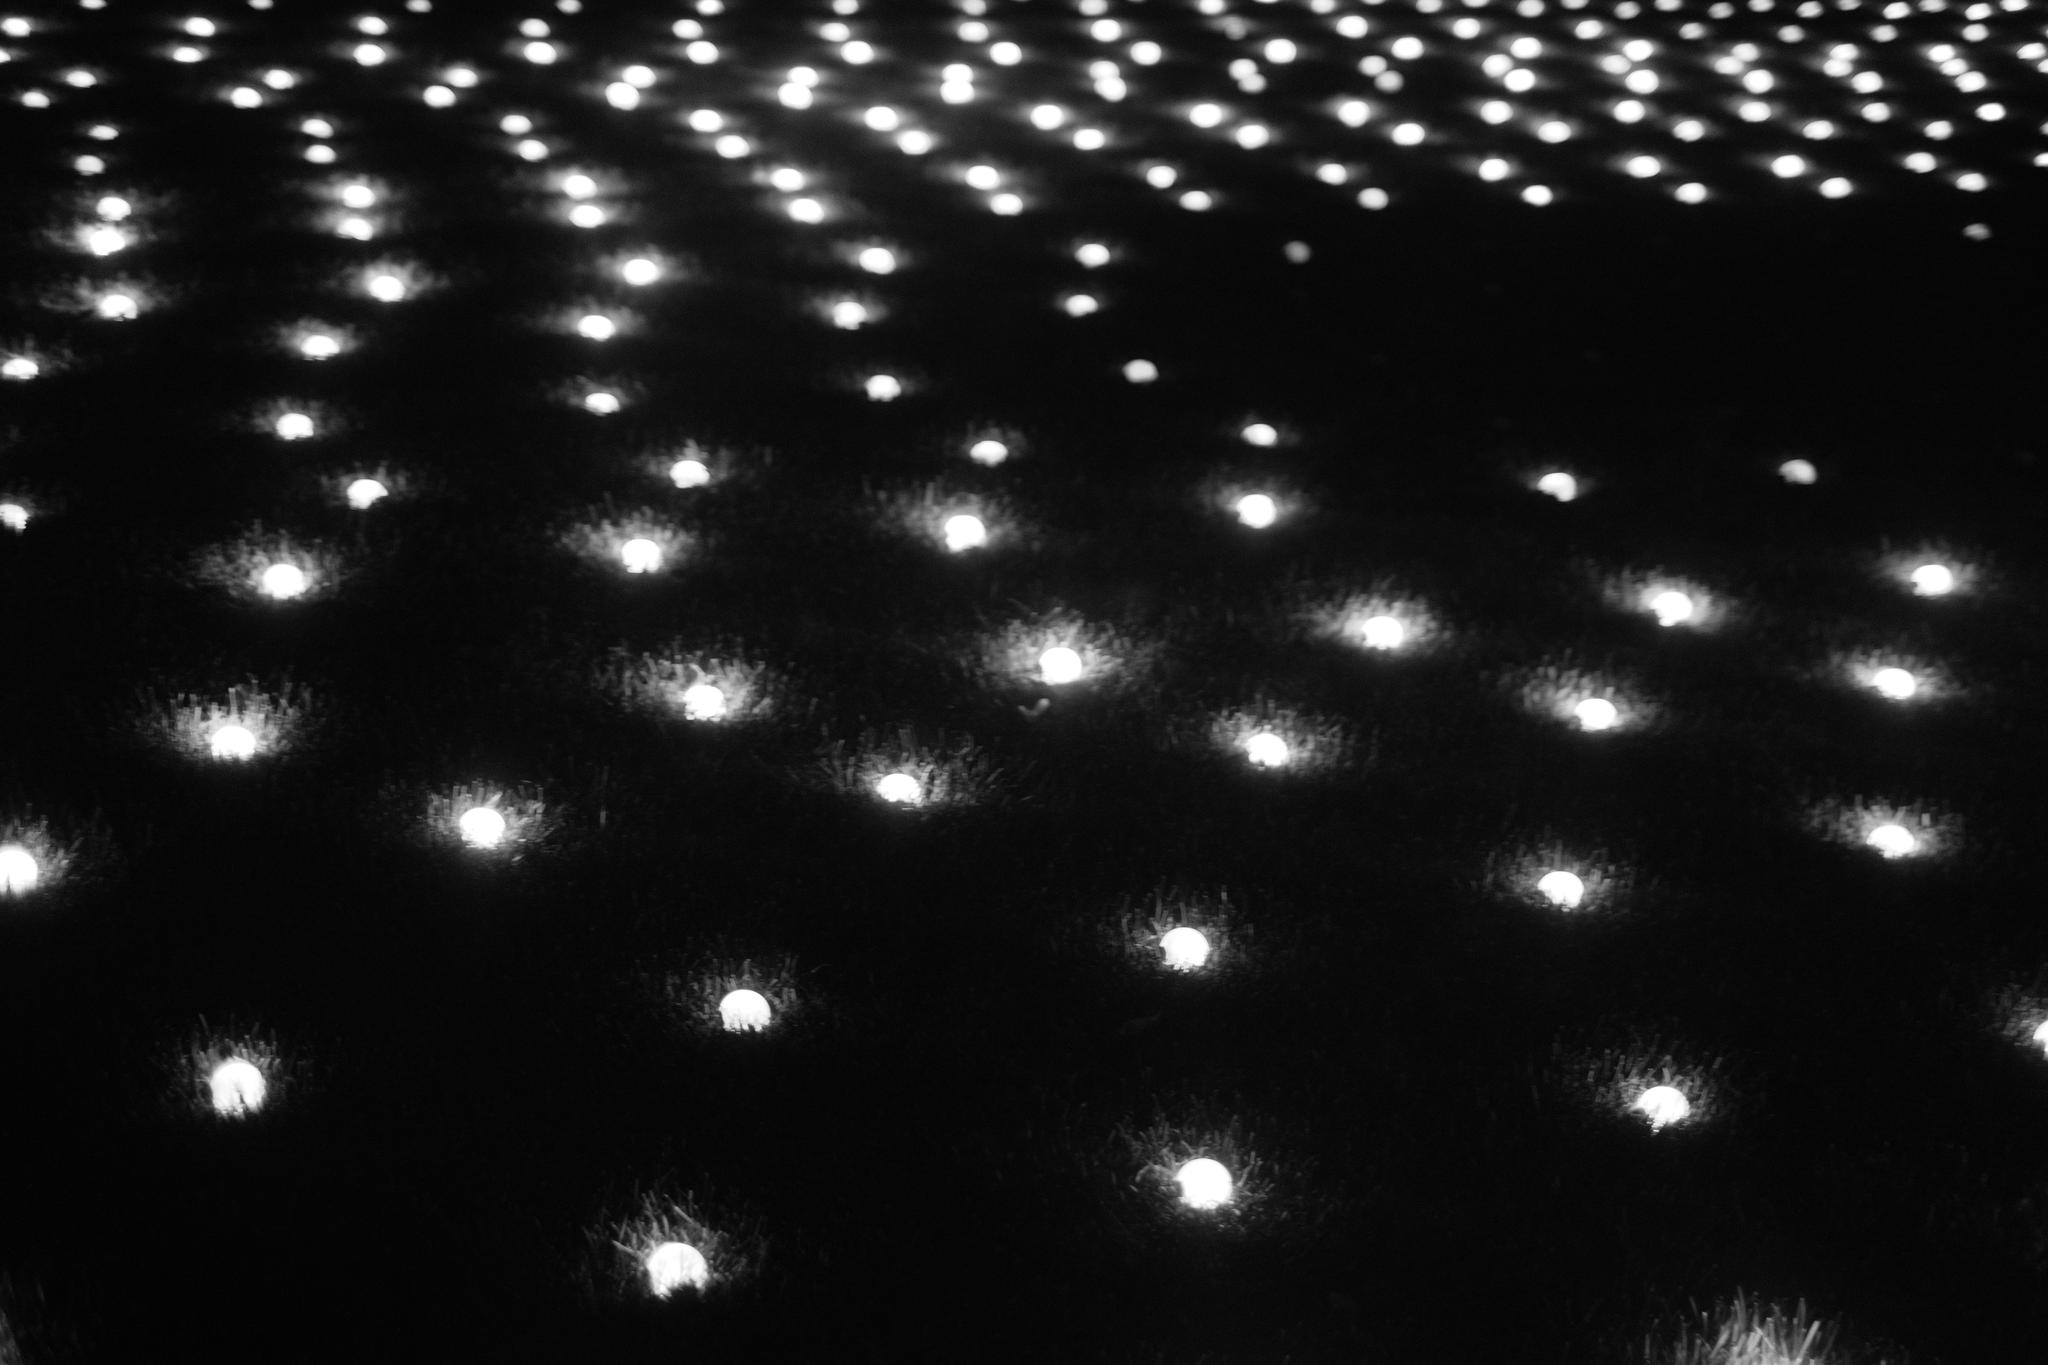 Numerous small lights arranged in a grid pattern on a dark surface, creating a glowing, starry effect